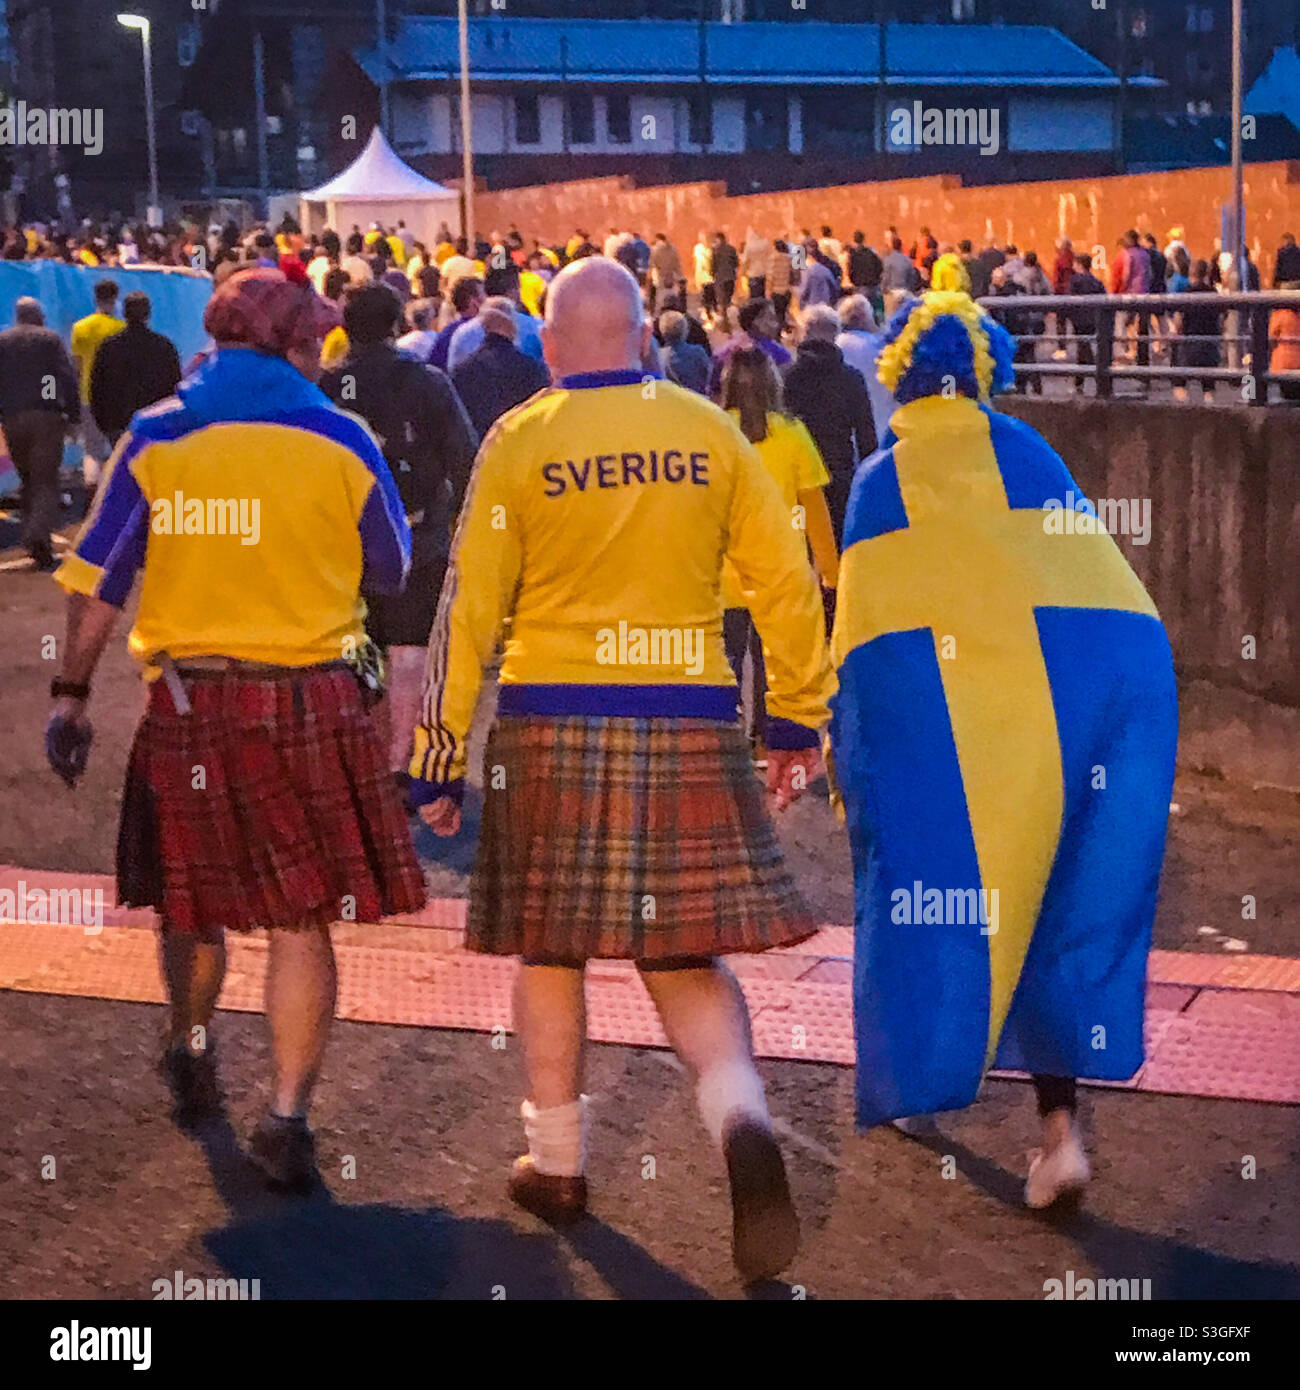 Football fans wearing Sweden tops and Scottish kilts at the Euro 2020 game between Sweden and Ukraine at Hampden Park in Glasgow, Scotland in June 2021 Stock Photo